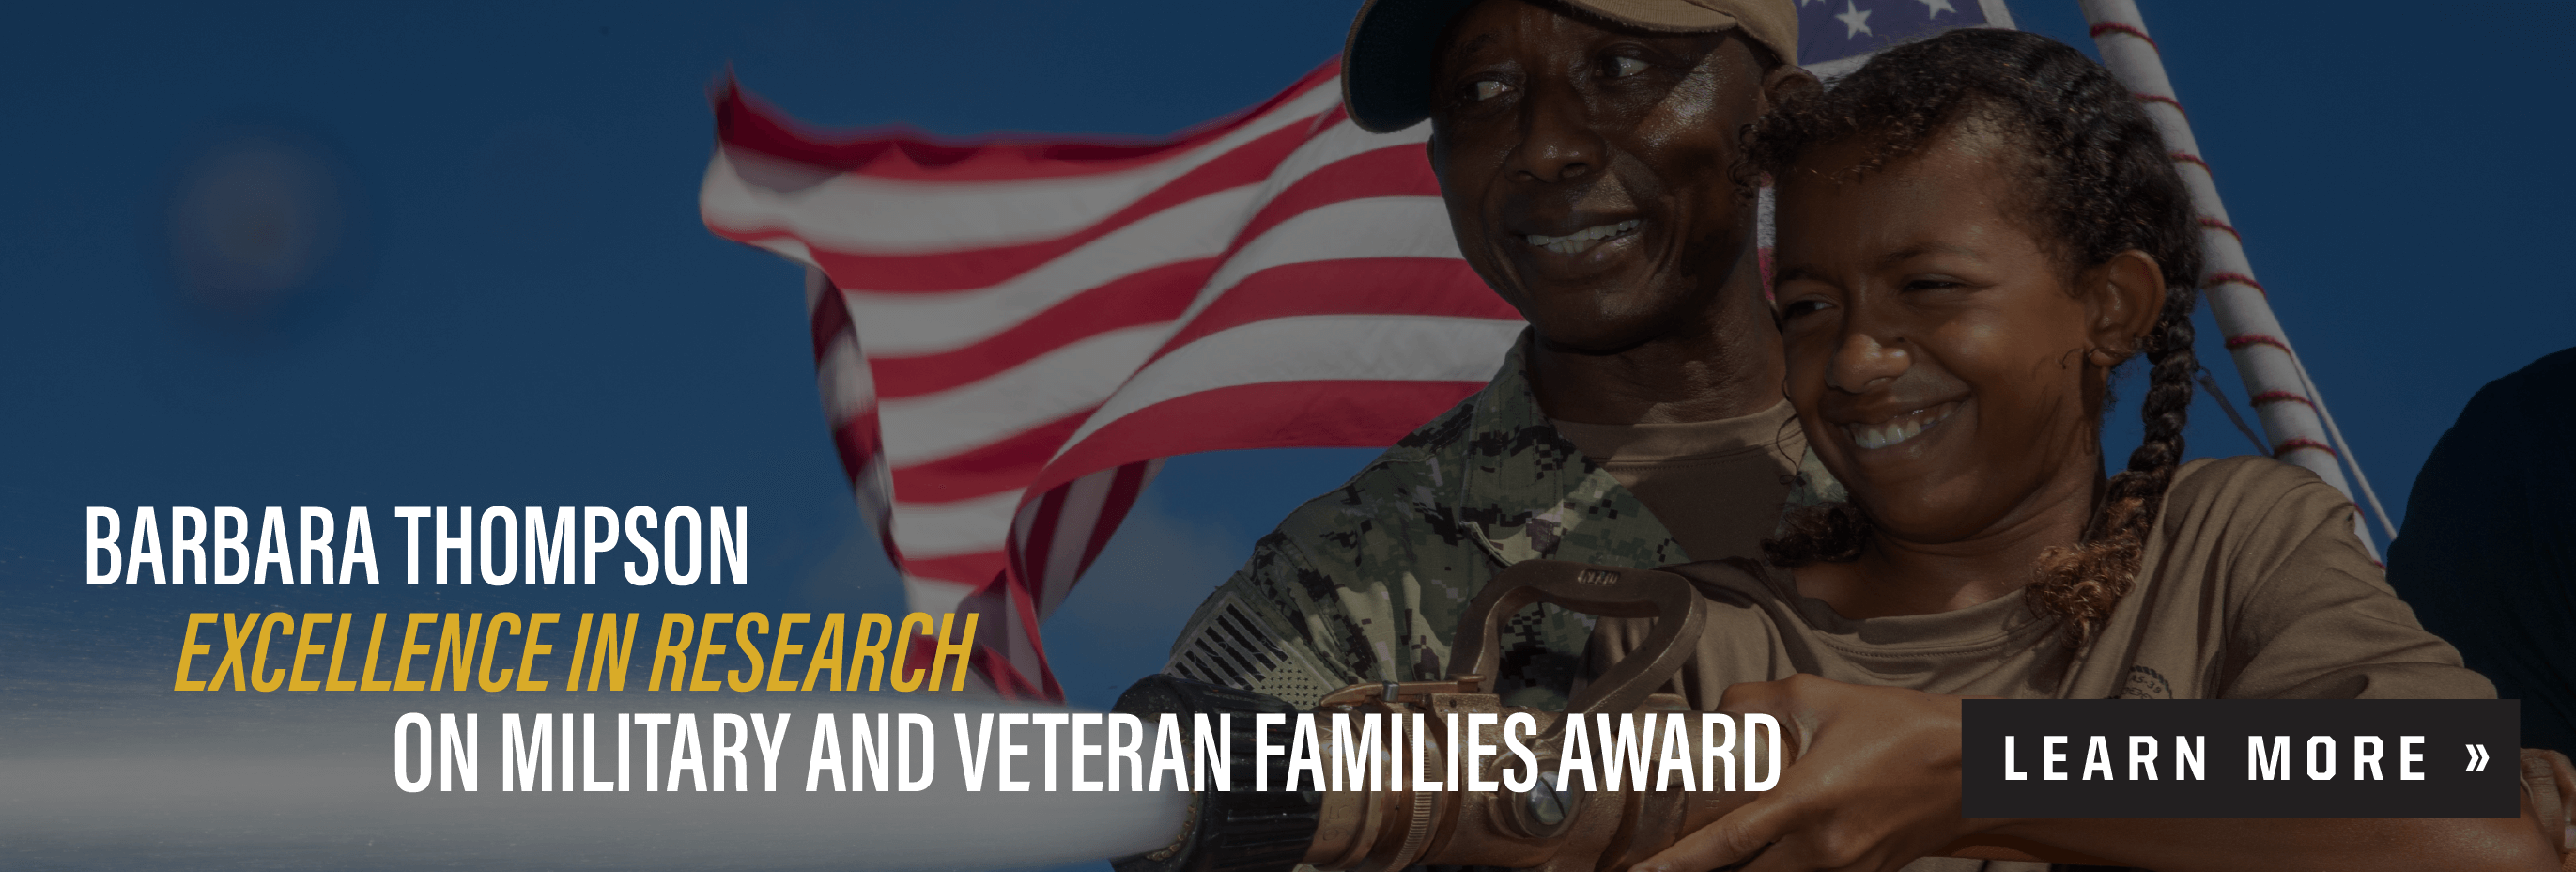 Learn more about the Barbara Thompson Excellence in Research on Military and Veteran Families Award.